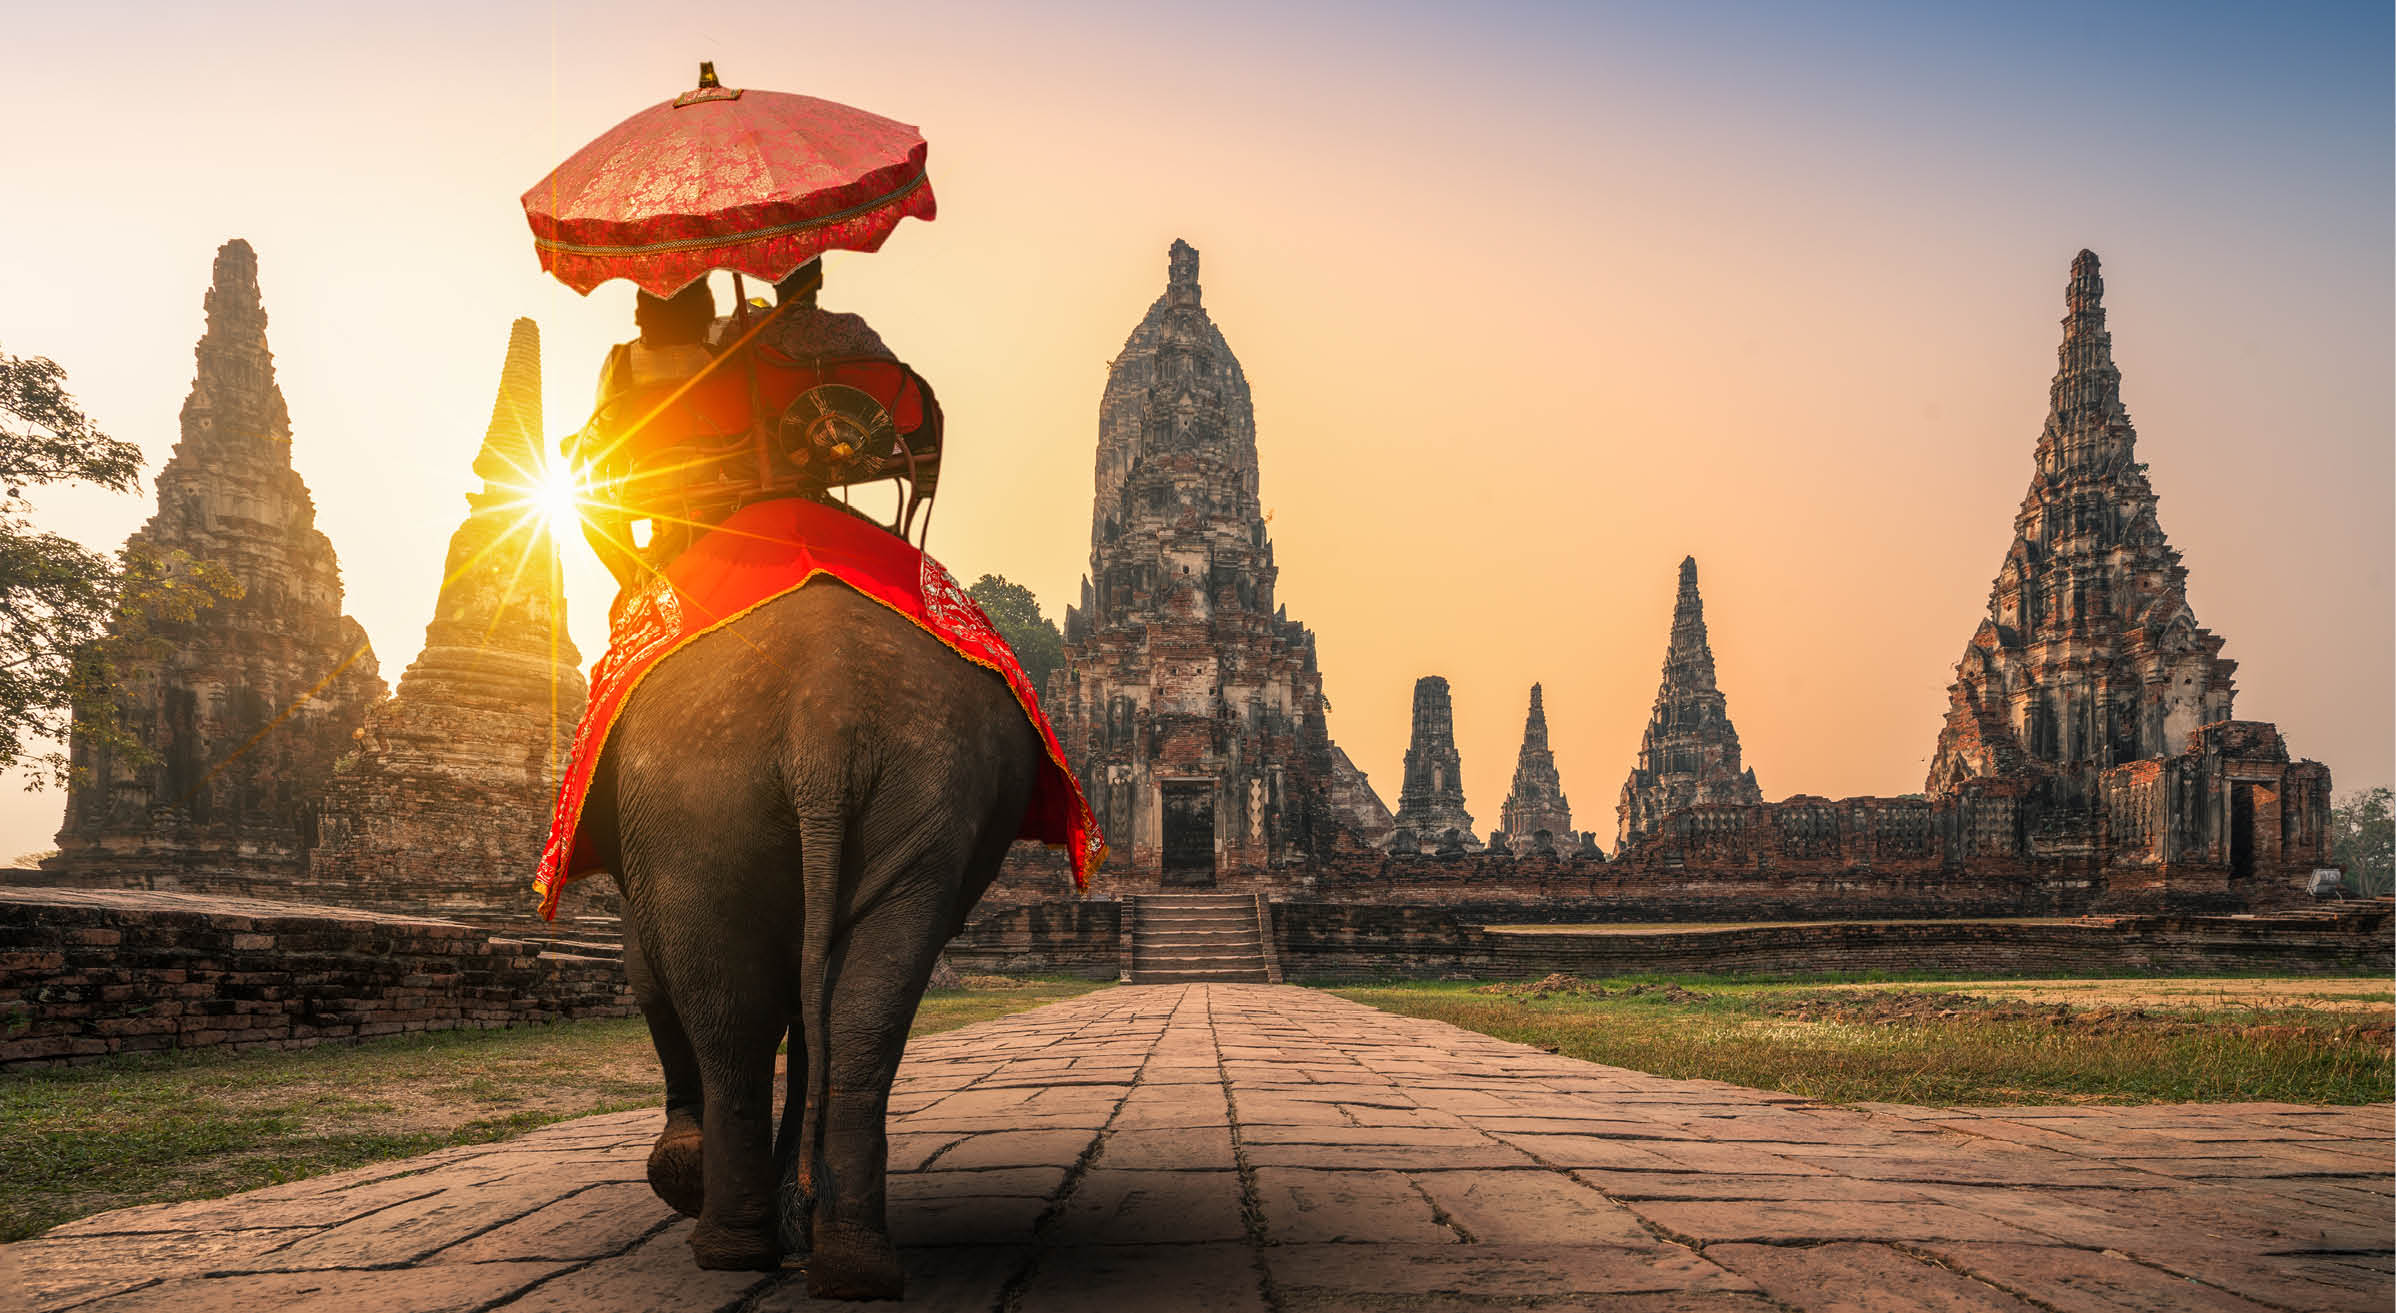 Tourists With an Elephant at Wat Chaiwatthanaram temple in Ayutthaya Historical Park, a UNESCO world heritage site in Thailand“n